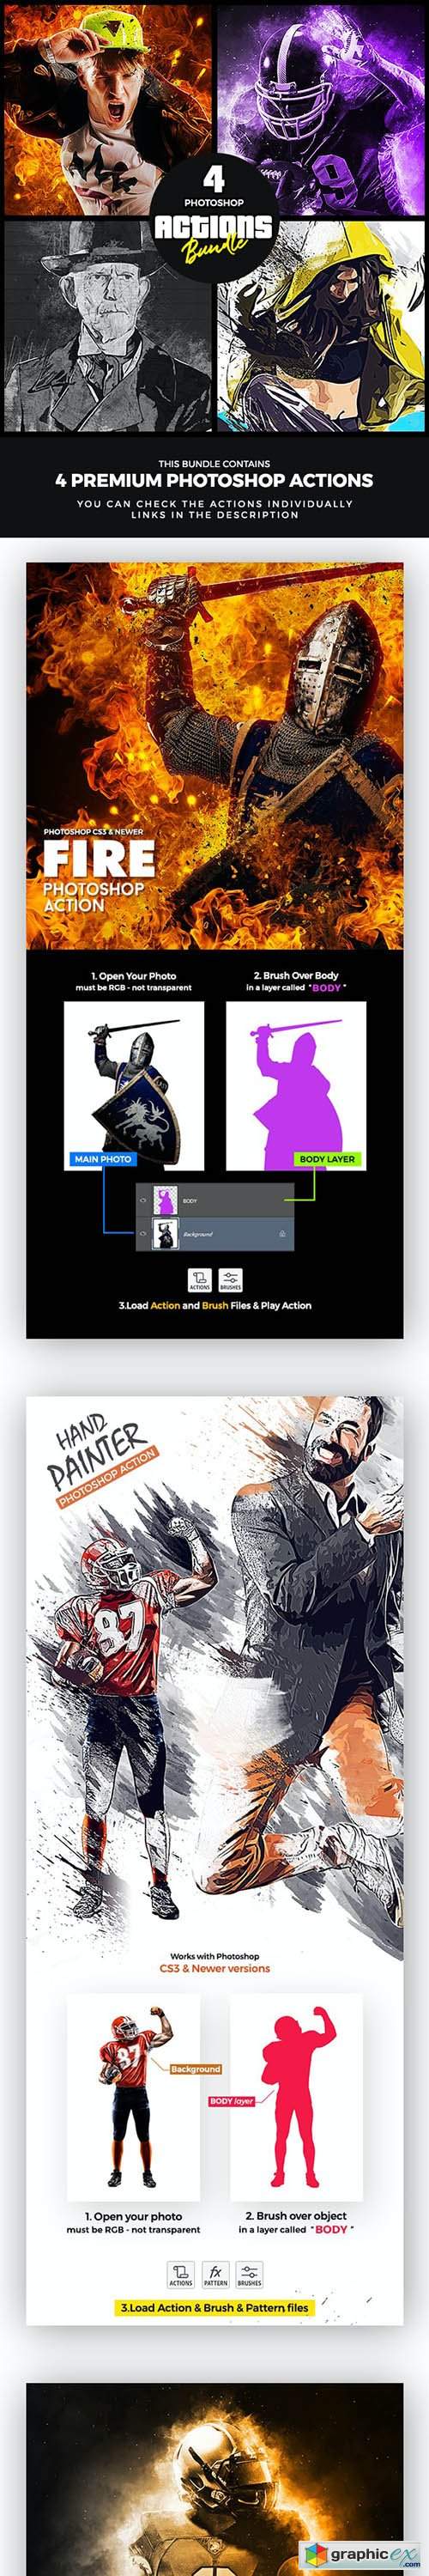 Actions Bundle May22 - Photoshop Actions 